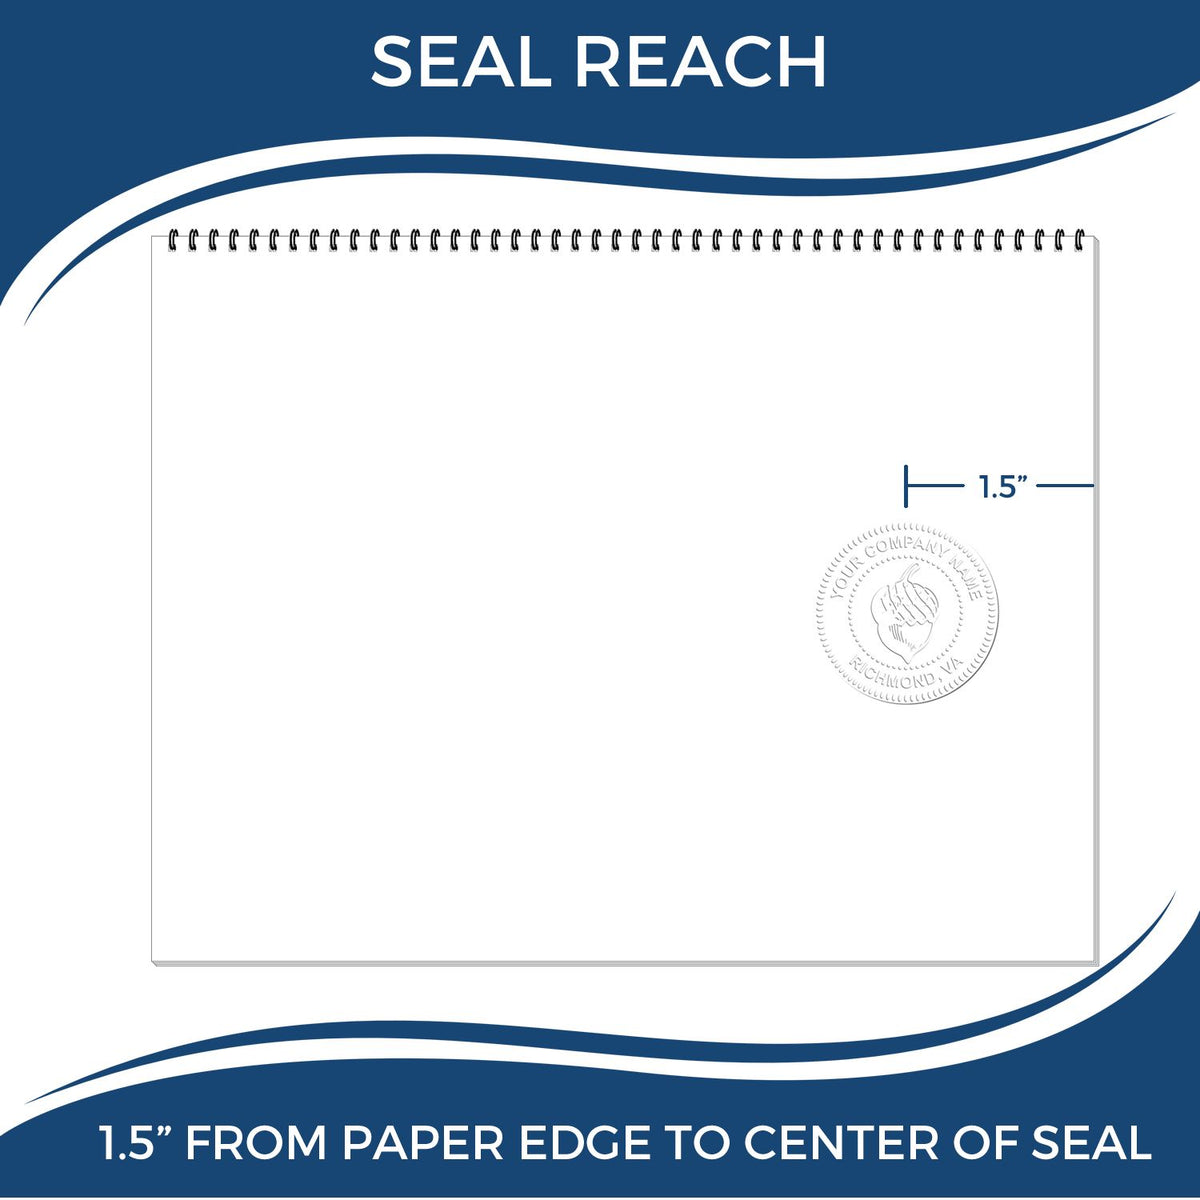 An infographic showing the seal reach which is represented by a ruler and a miniature seal image of the State of Idaho Architectural Seal Embosser